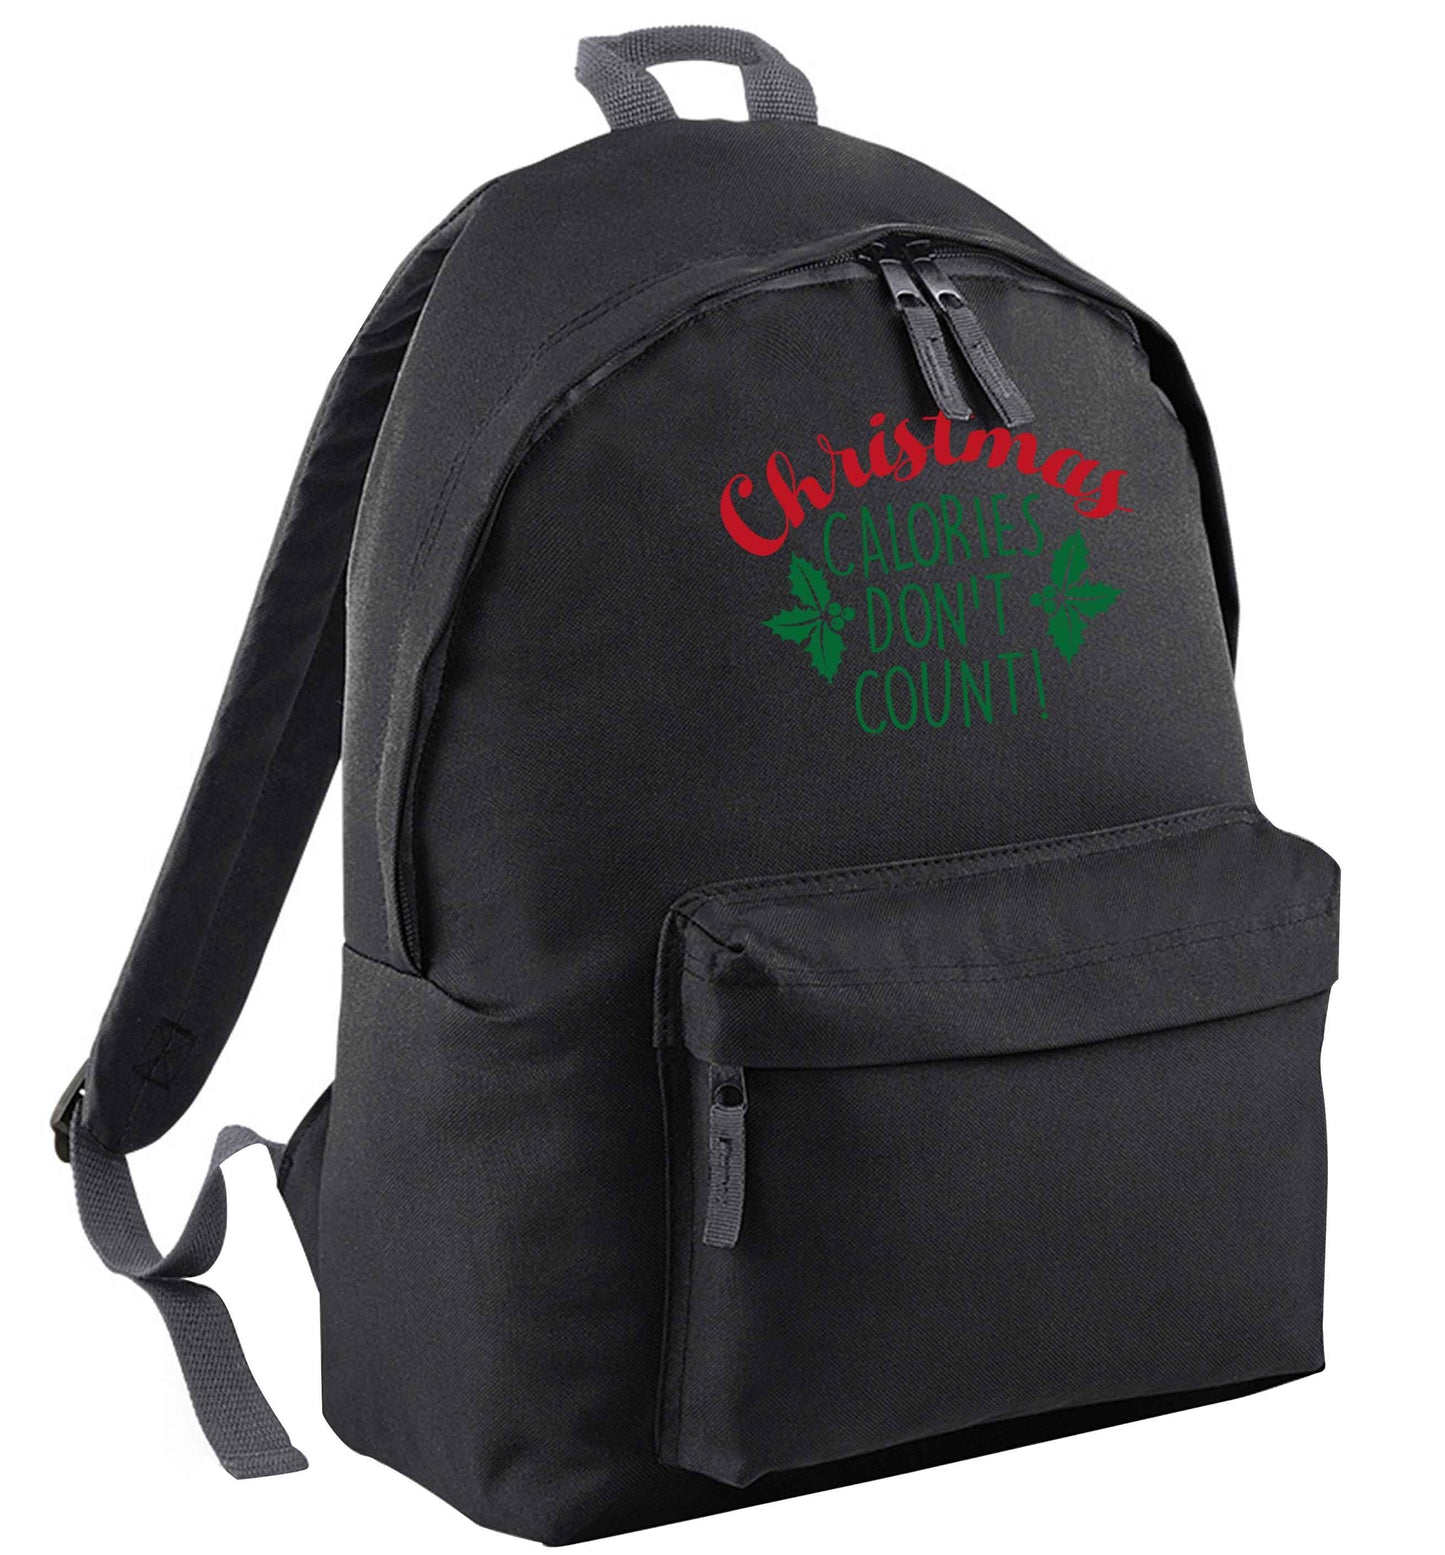 Christmas calories don't count black adults backpack